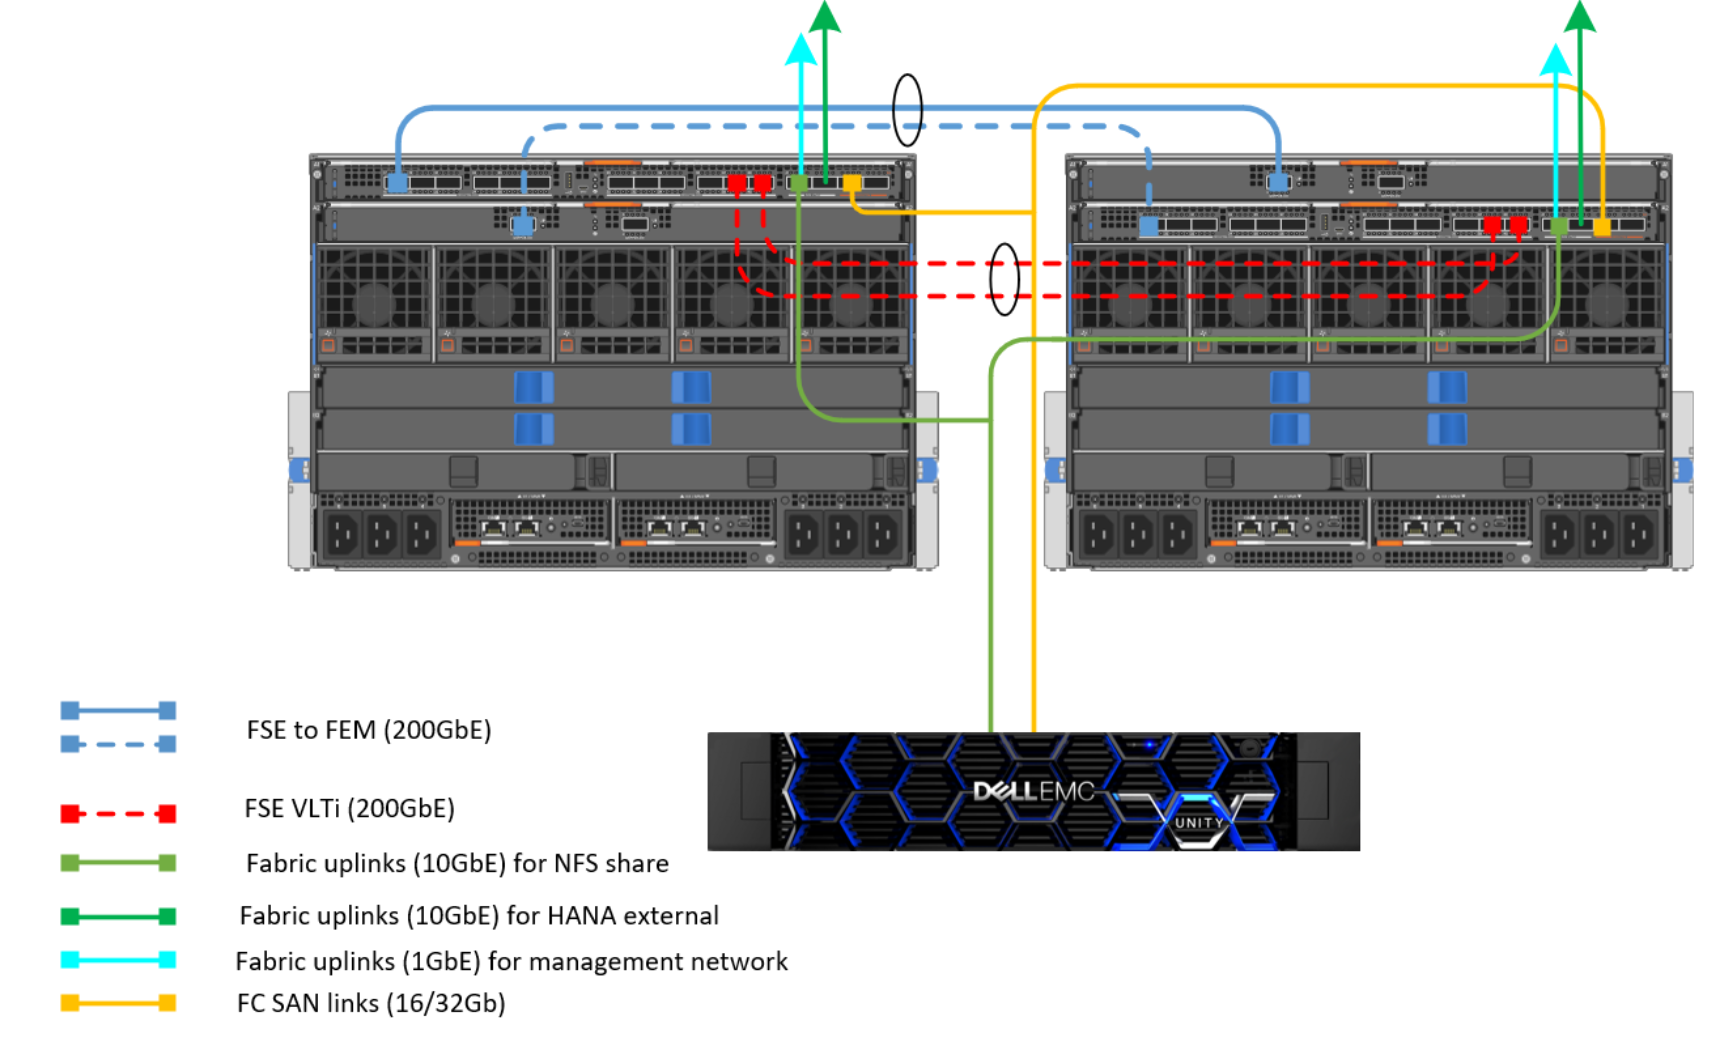 Screenshots showing cabling for an SAP HANA scale-out solution using two PowerEdge MX7000 chassis